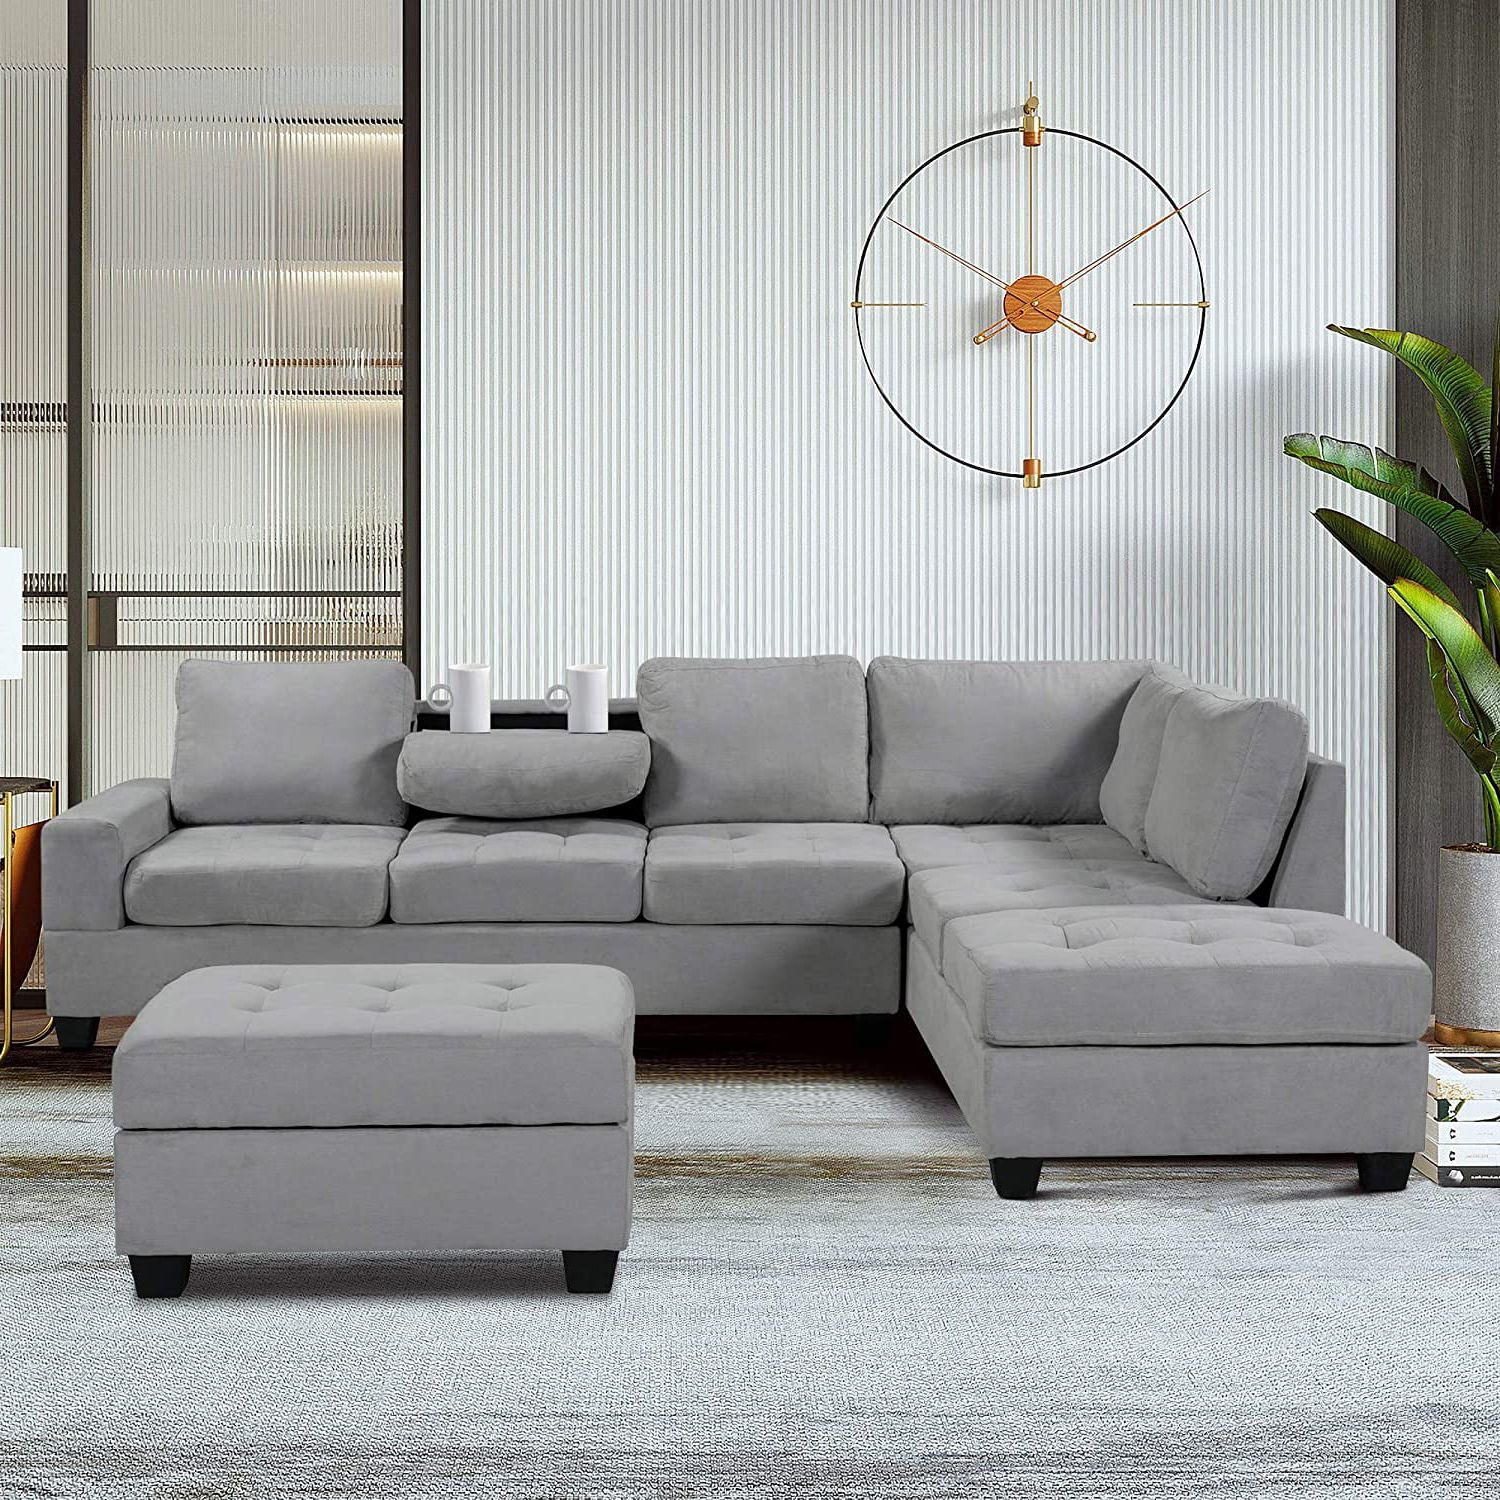 3 Piece Convertible Sectional Sofa L Shaped Couch With Reversible Pertaining To Sofas With Ottomans (Gallery 15 of 20)